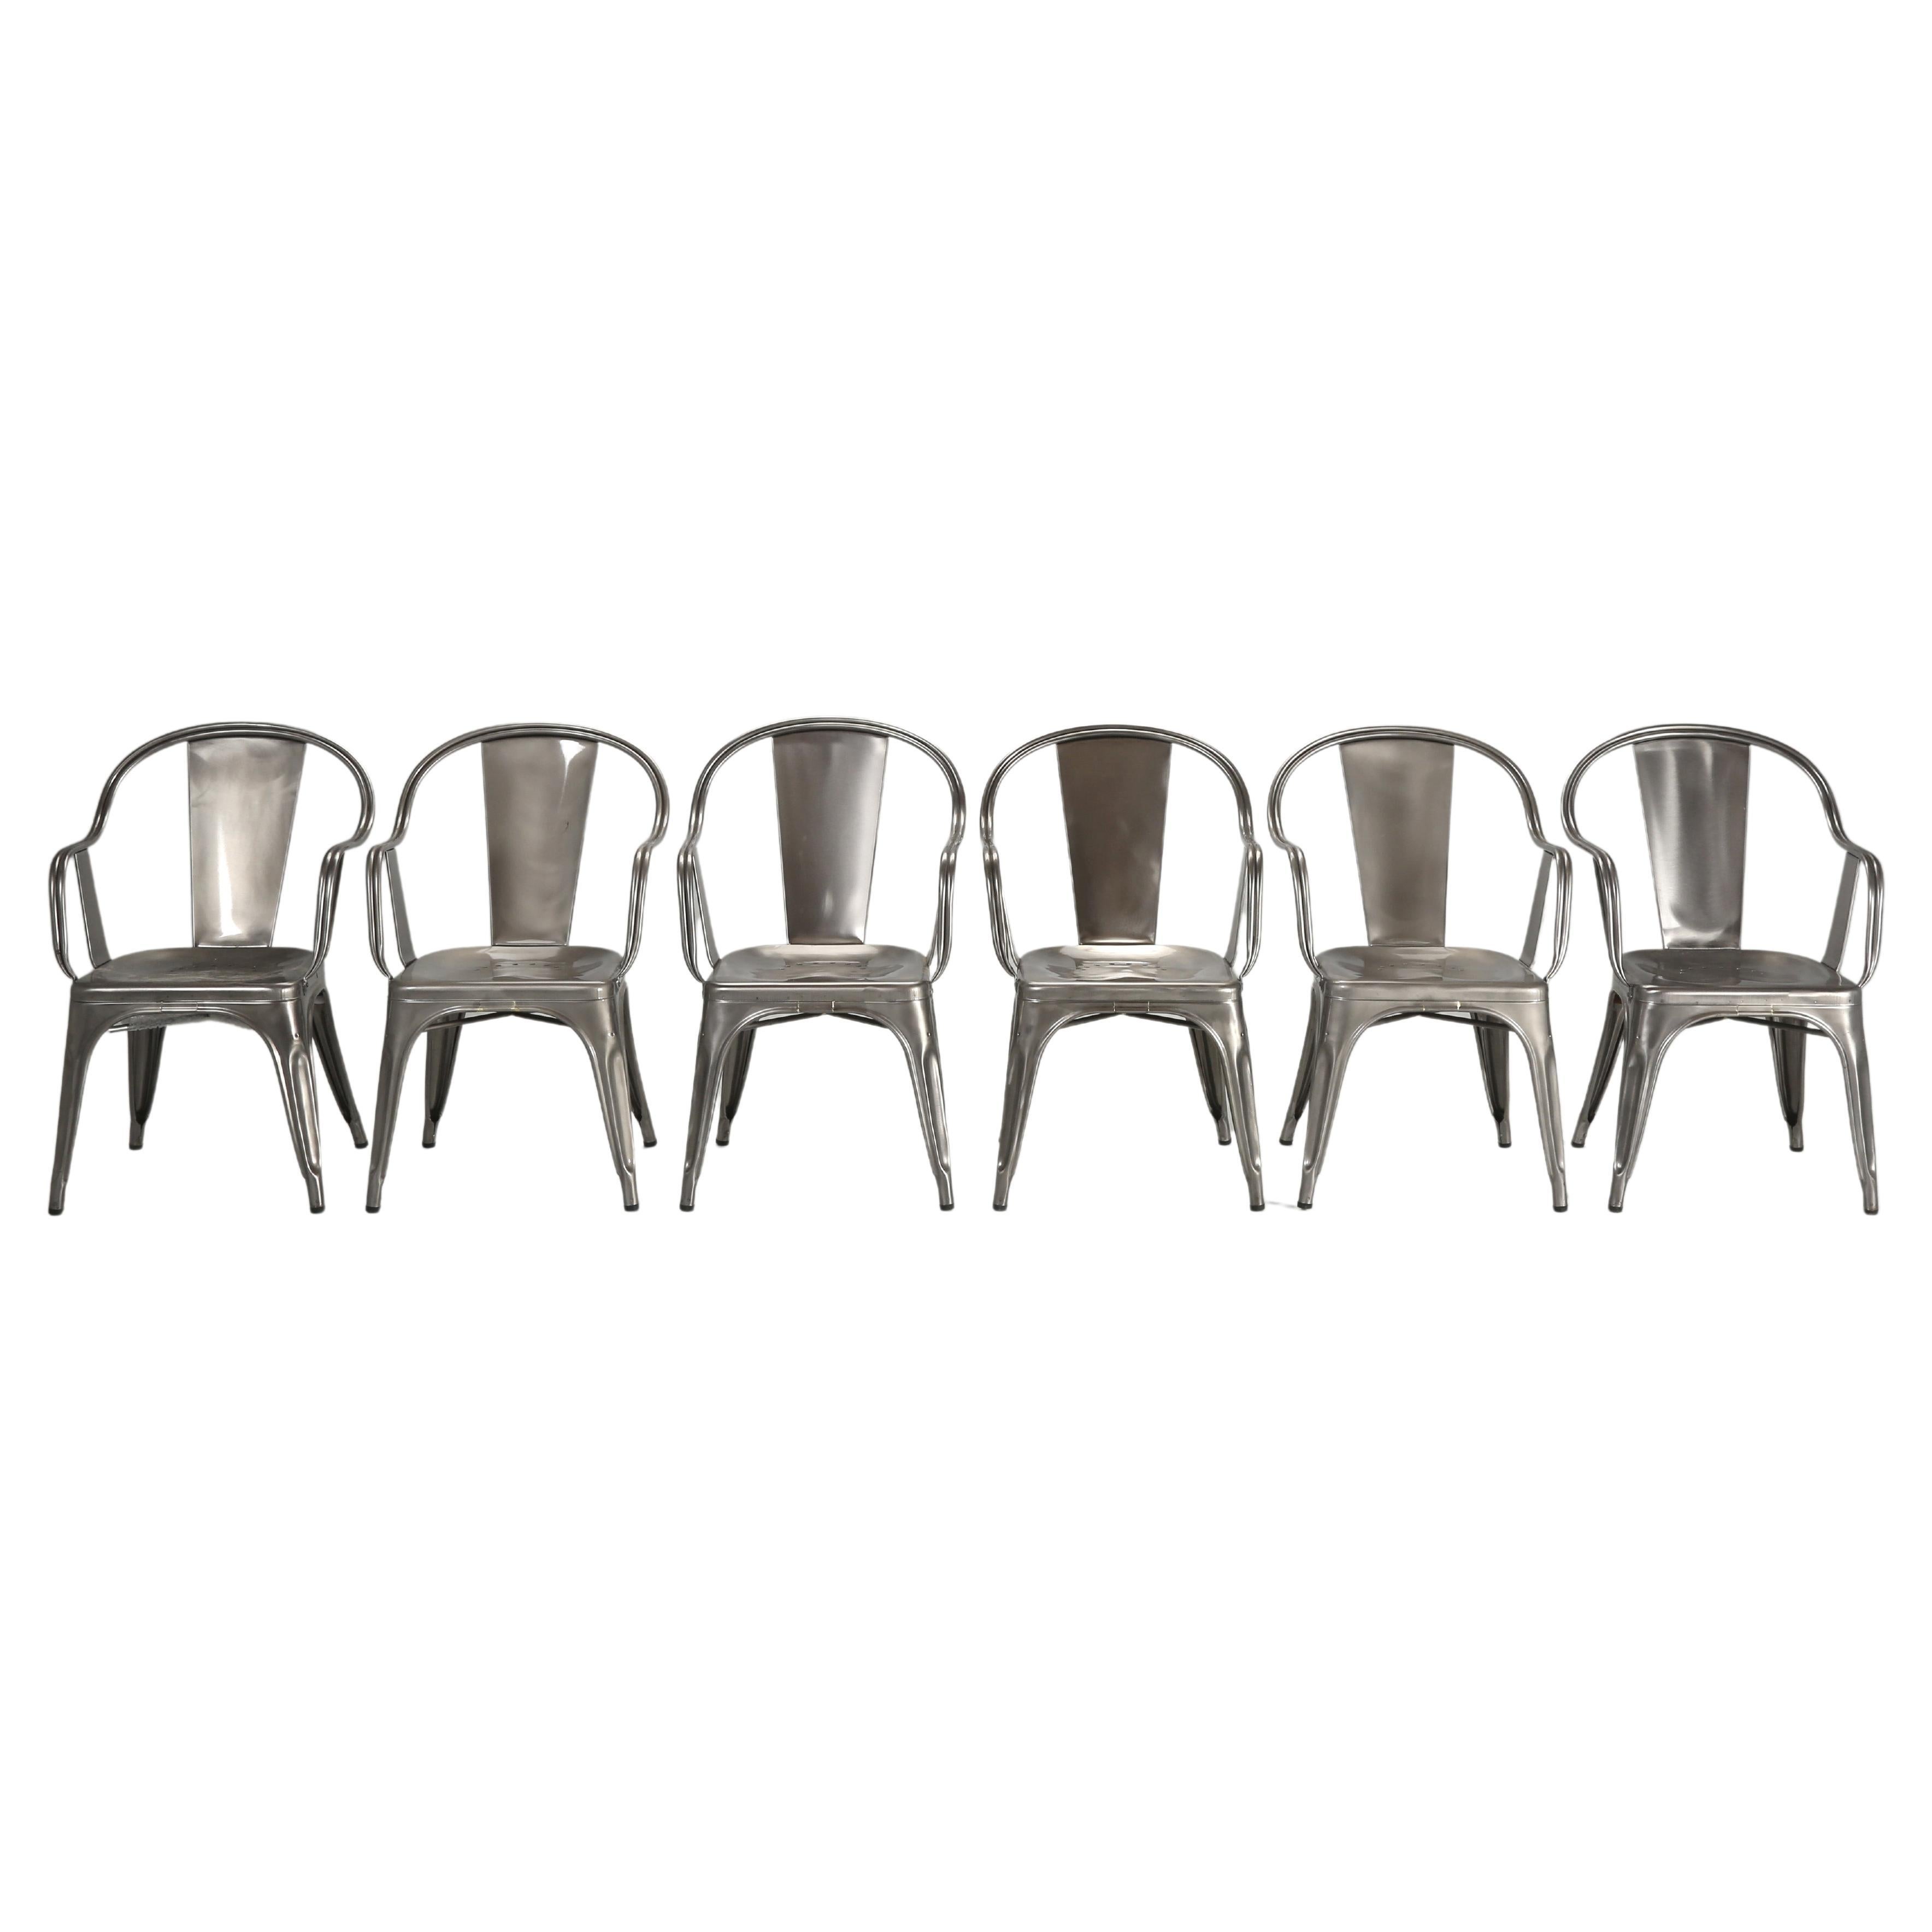 Genuine French Made Tolix Arm Chairs Powder Coated, Showroom Samples Minor Flaws